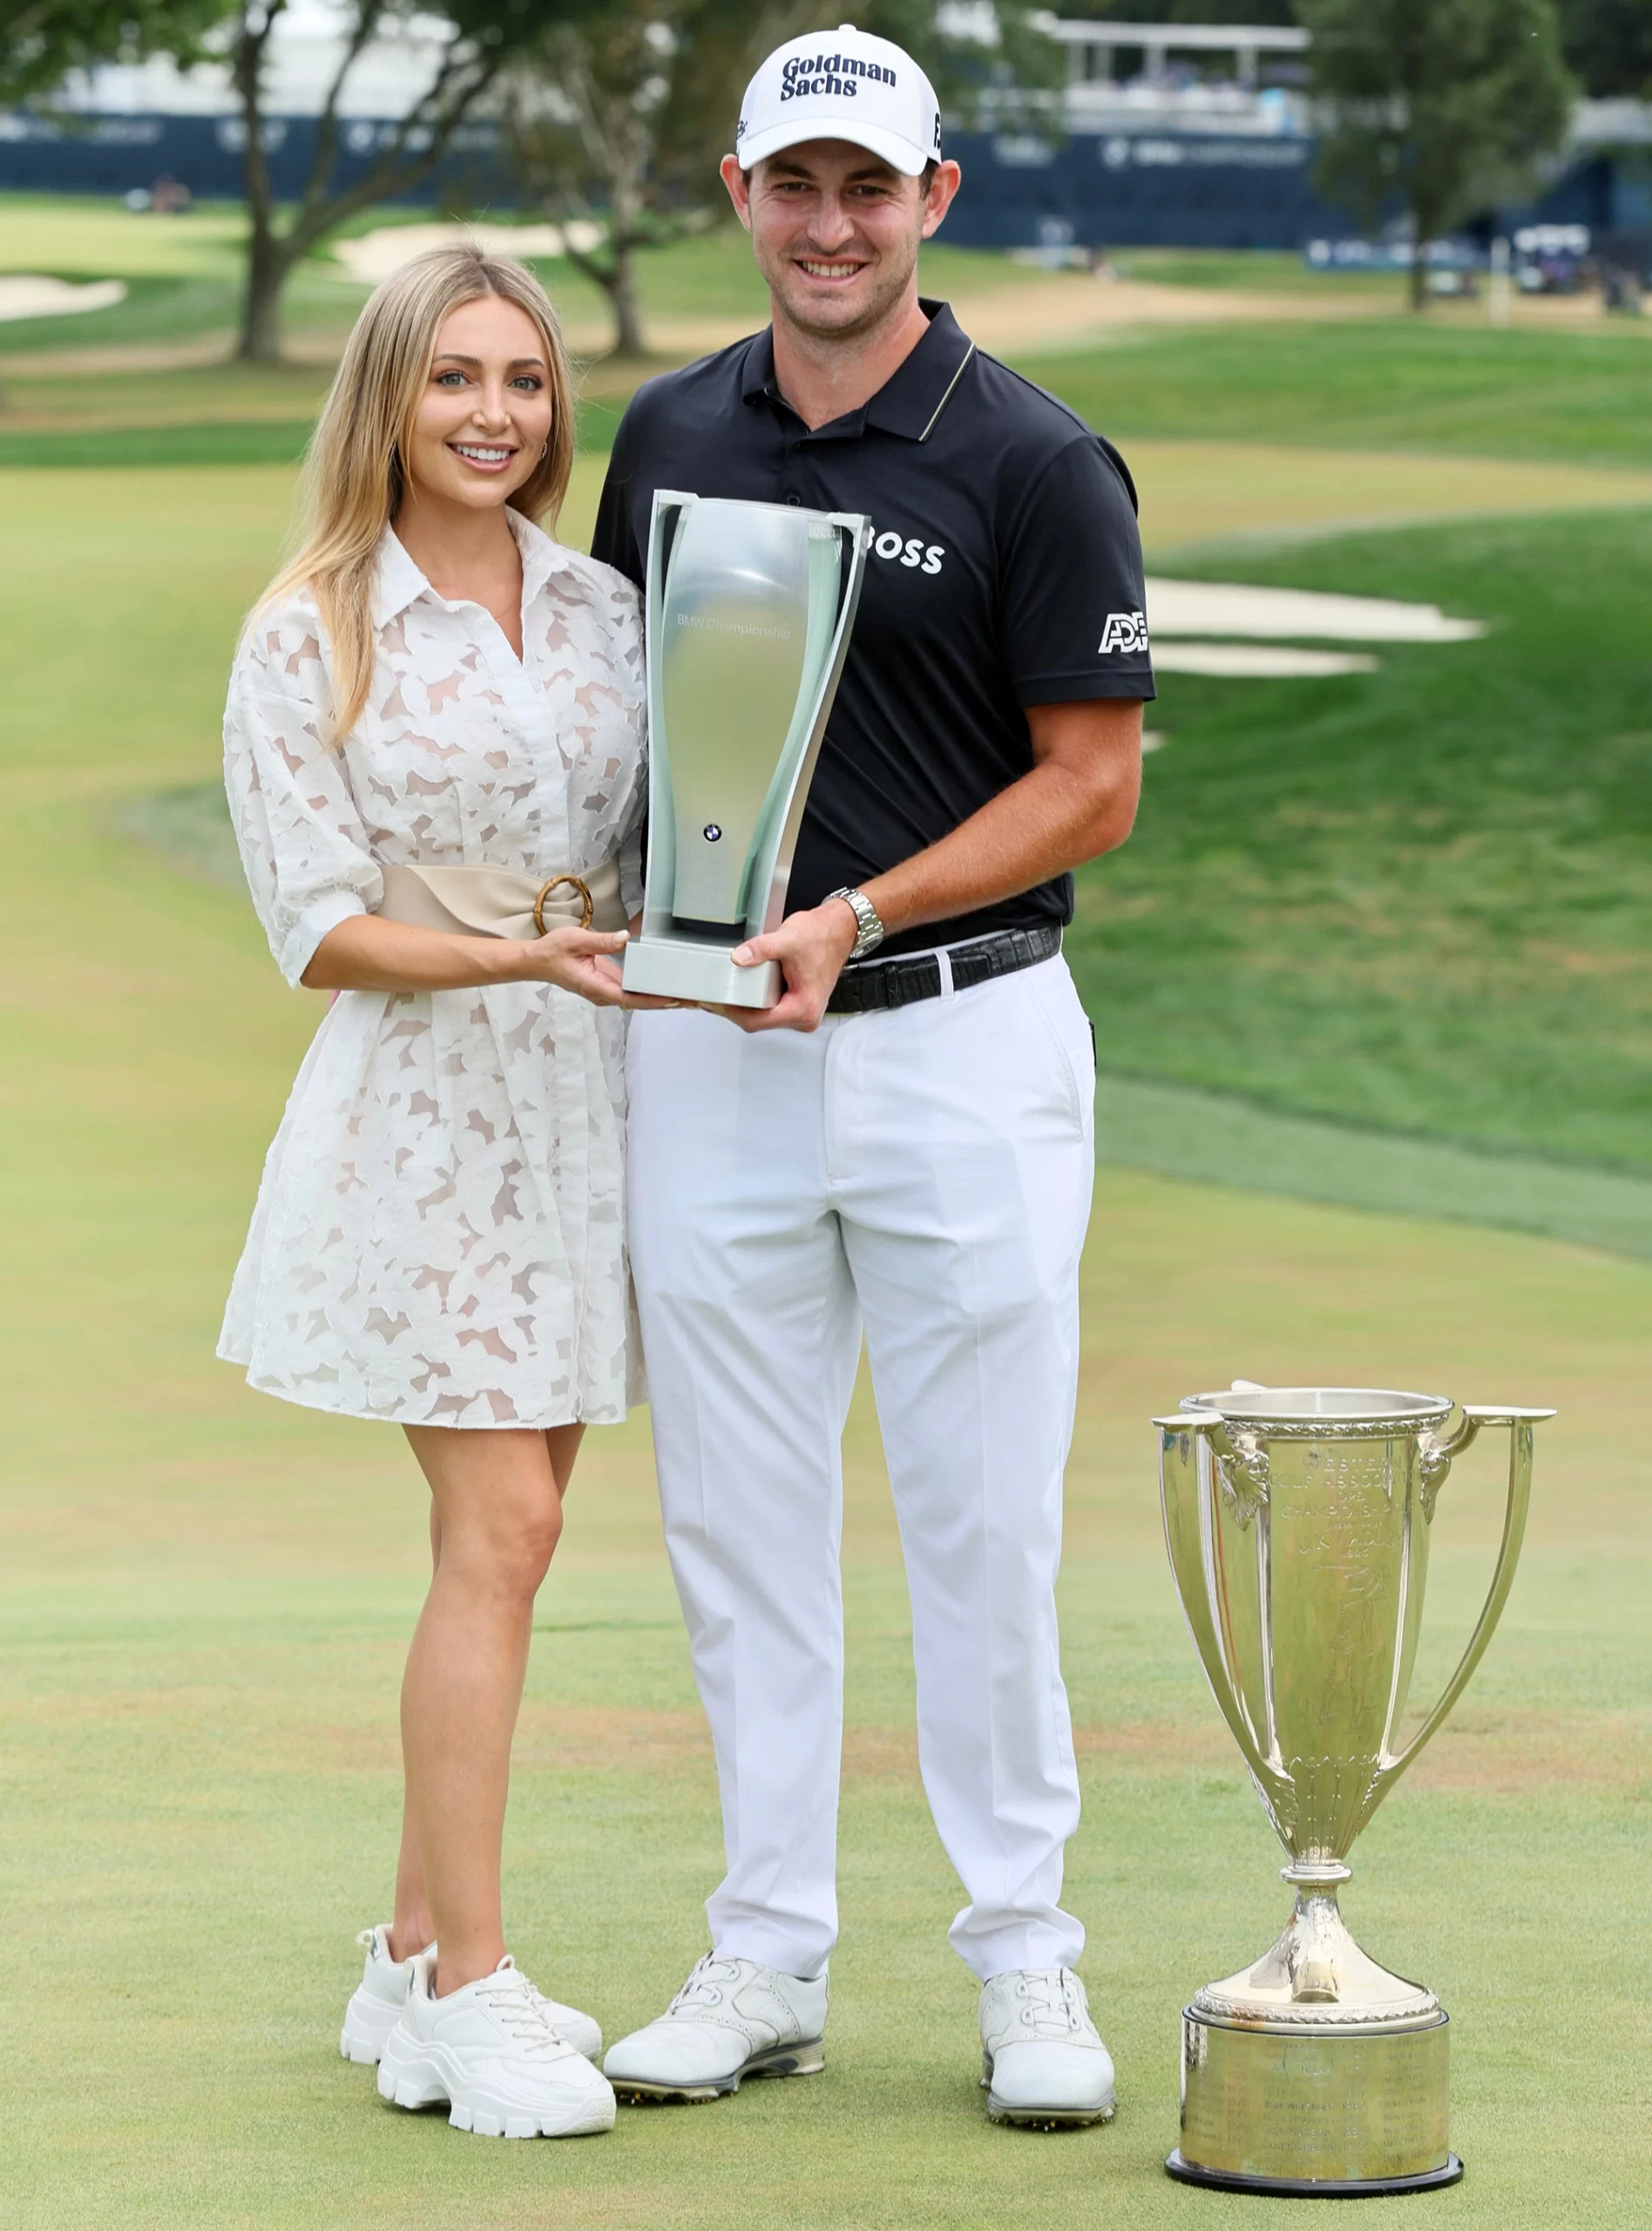 Patrick Cantlay Wife Or Girlfriend? Is Patrick Married To Nikki Guidish